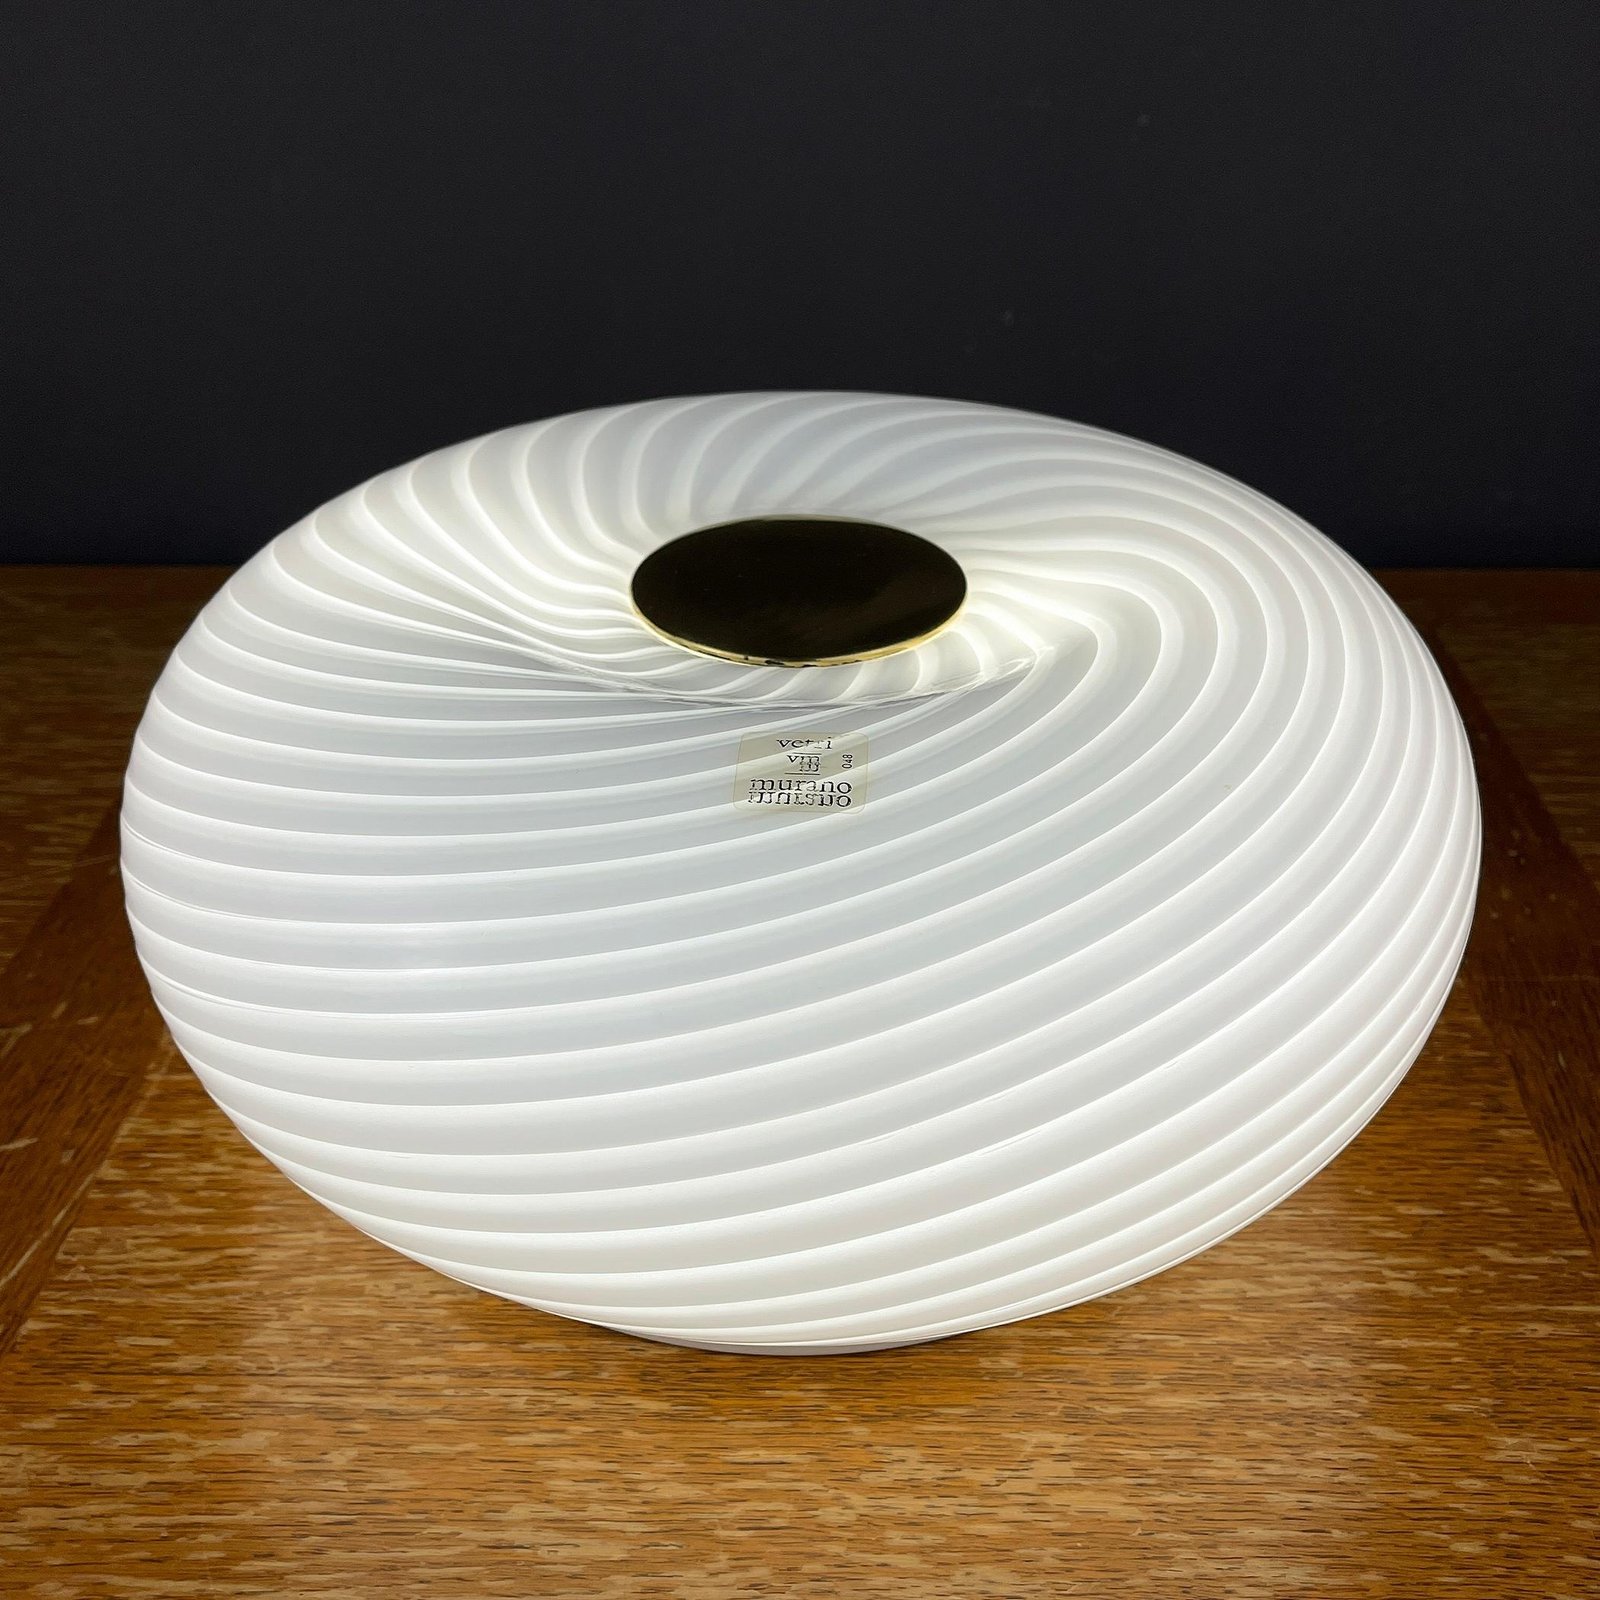 Mid-century swirl murano glass ceiling, table or wall lamp Vetri Murano 048 by Leucos Italy 1970s